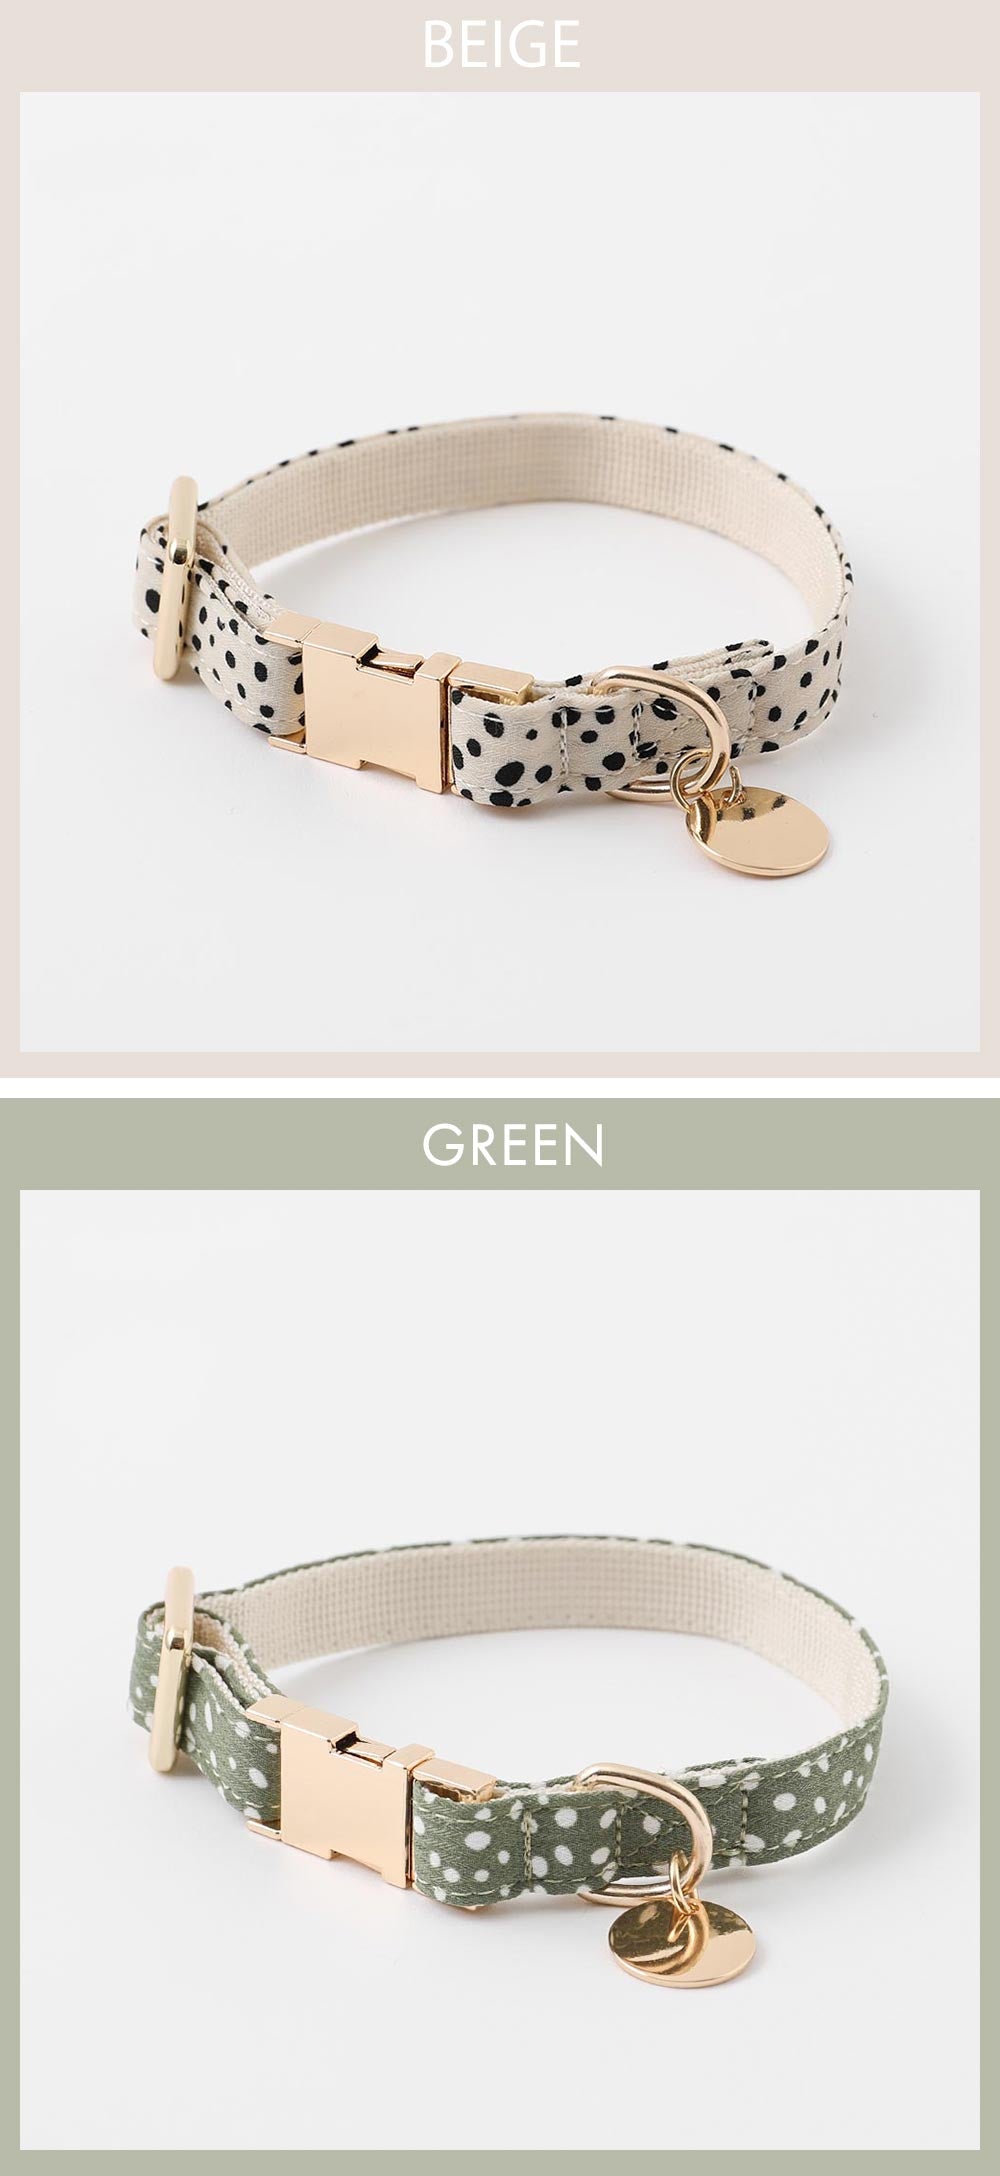 Small dog/collar/name sculpture/lost bill/fashion/Korean style/animal pattern/Dalmatian pattern/color variation/beige/green